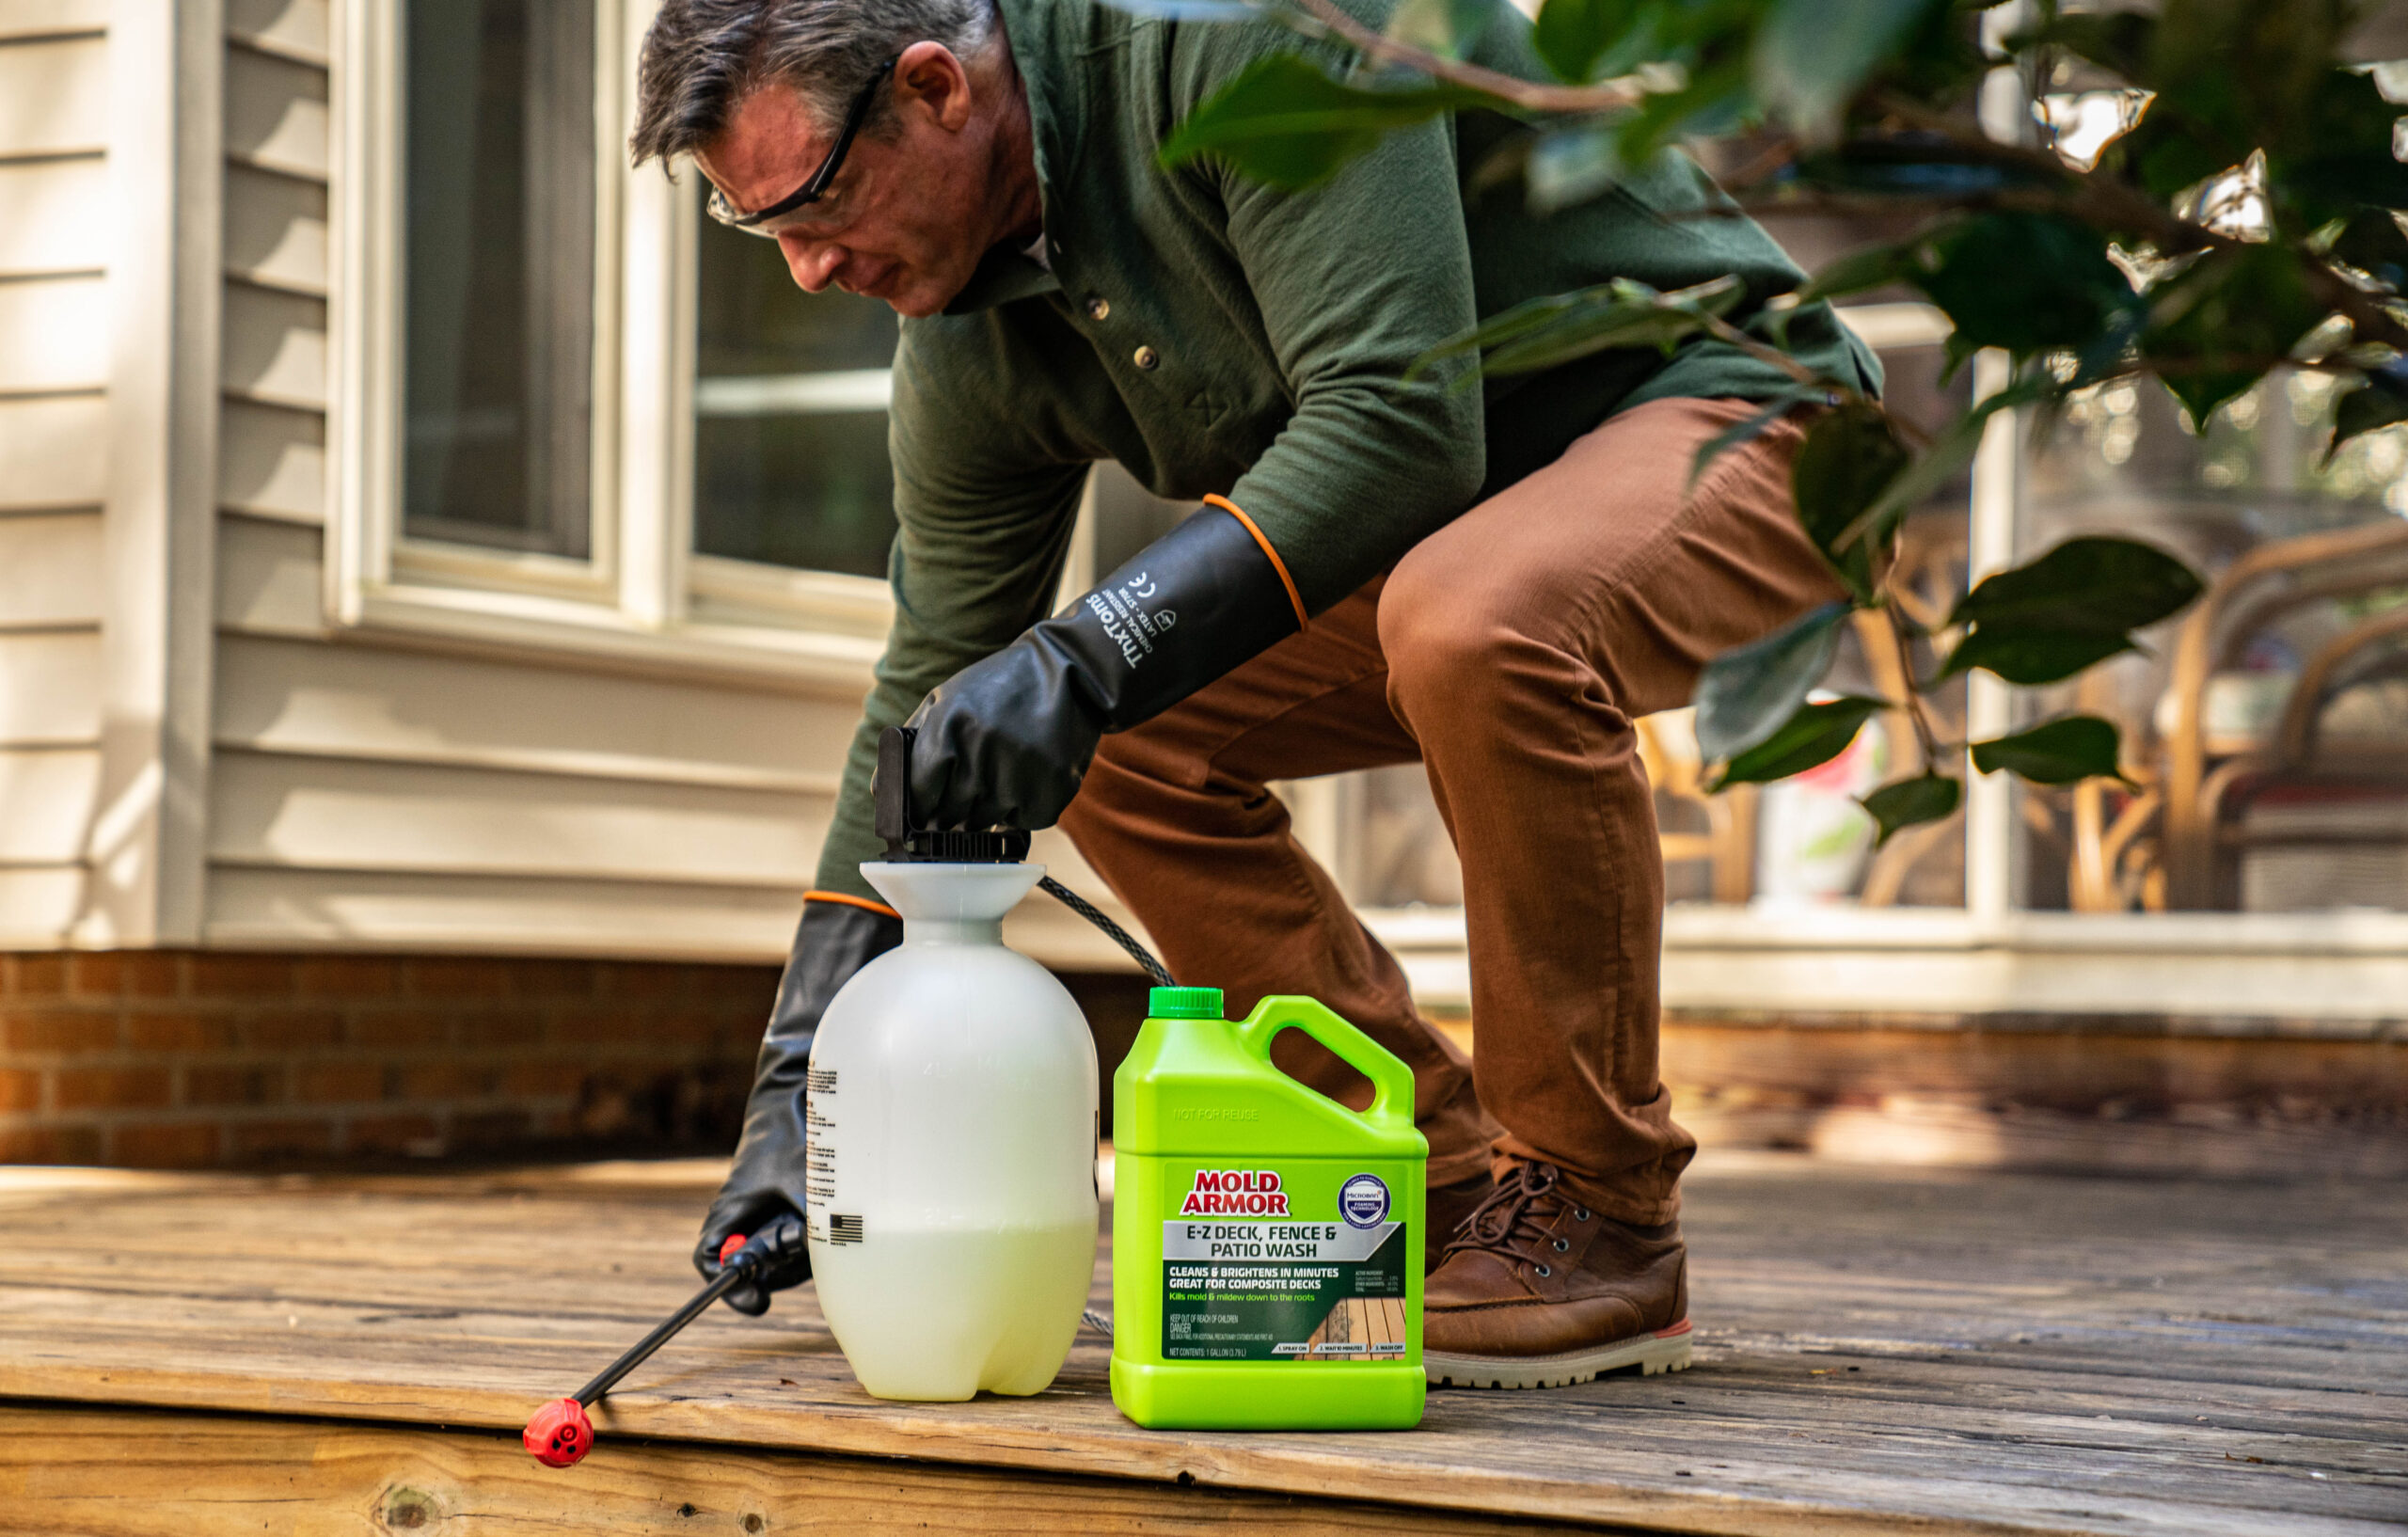 Mold Armor E-Z Deck Wash for Wood Surfaces, Composite Deck & Fence, 1 Gal.  - Mold Armor